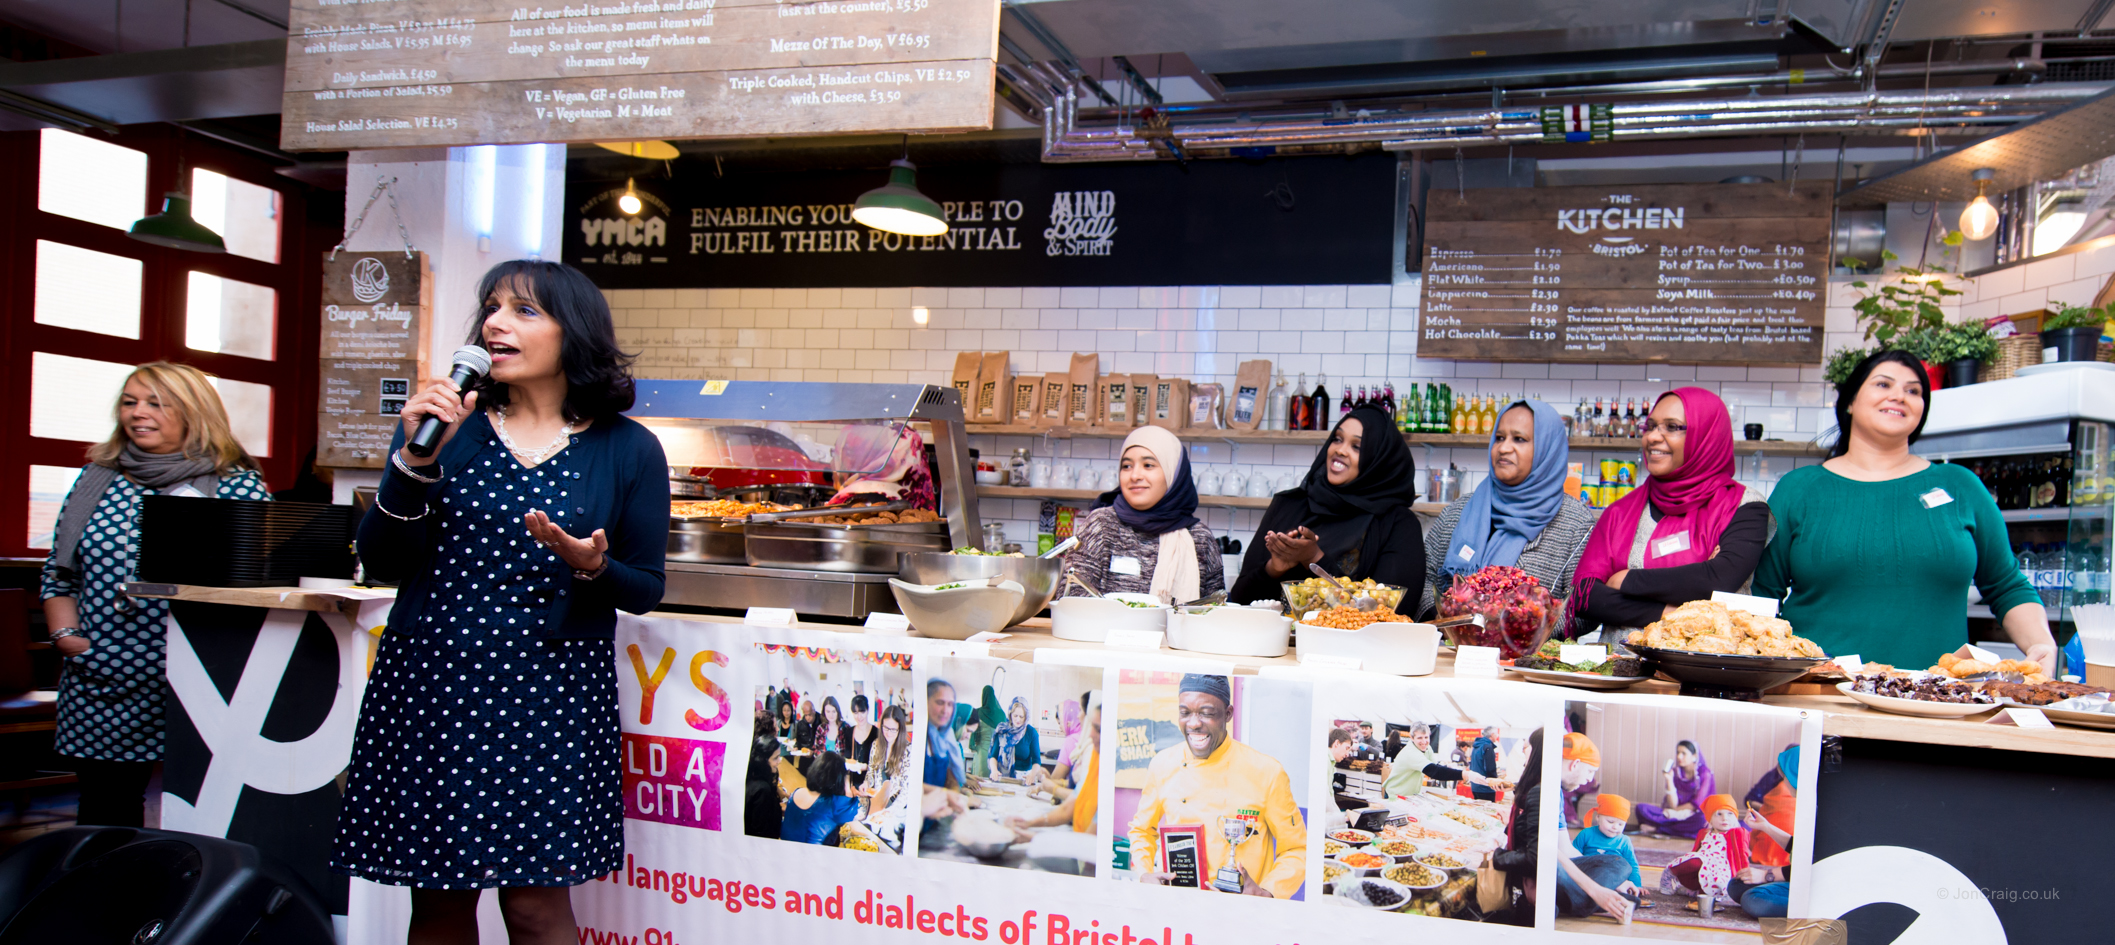 Series of supper events will offer taste of Bristol’s cultural diversity through its food